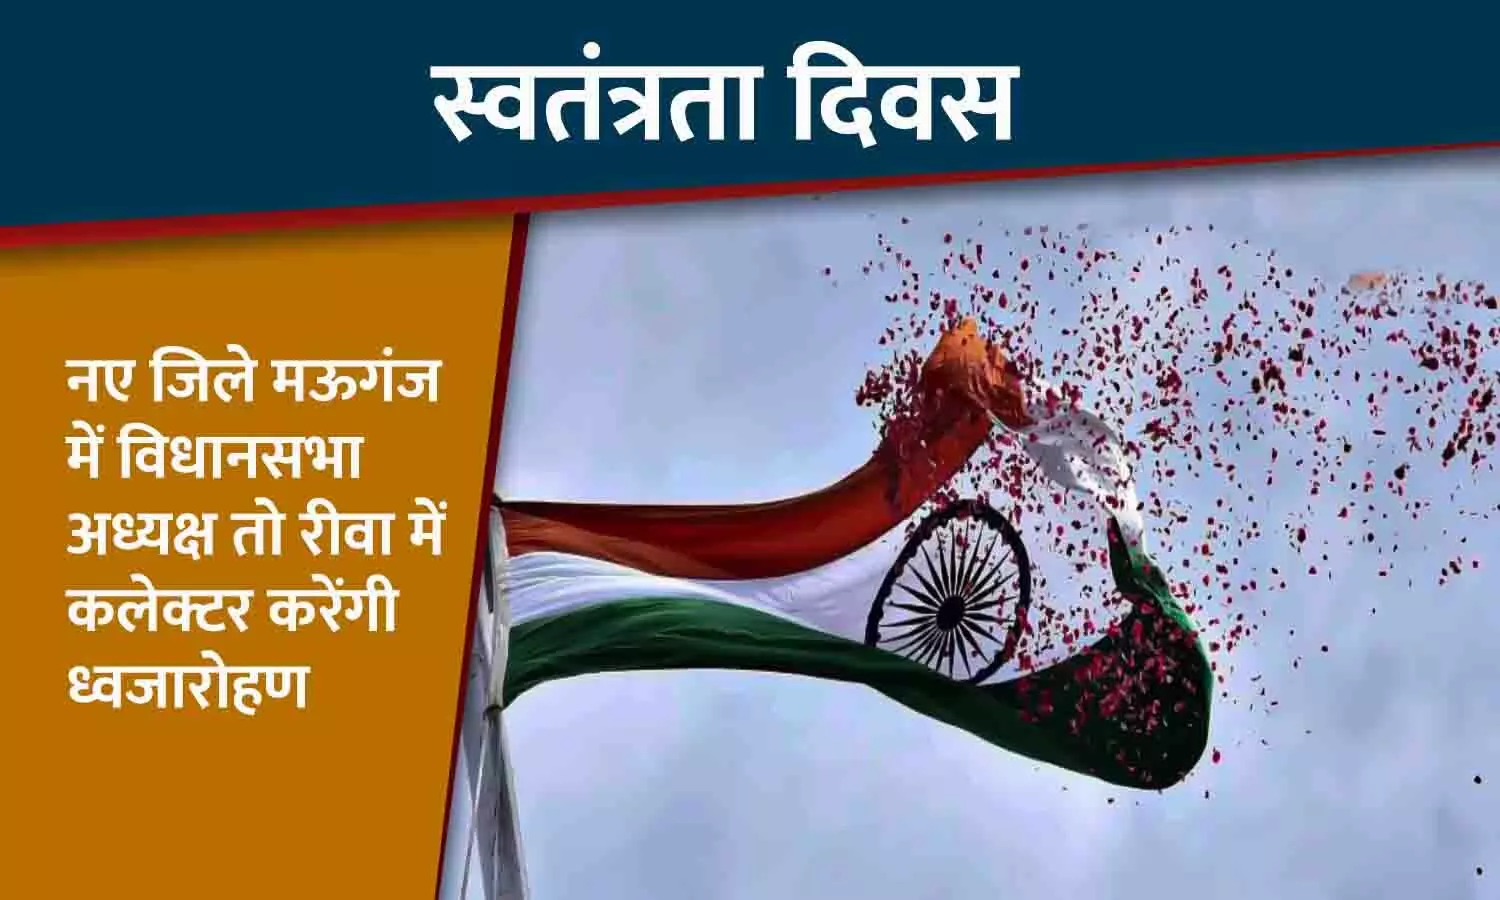 On Independence Day, Assembly Speaker Girish Gautam will hoist flag in Mauganj and Collector Pratibha Pal in Rewa